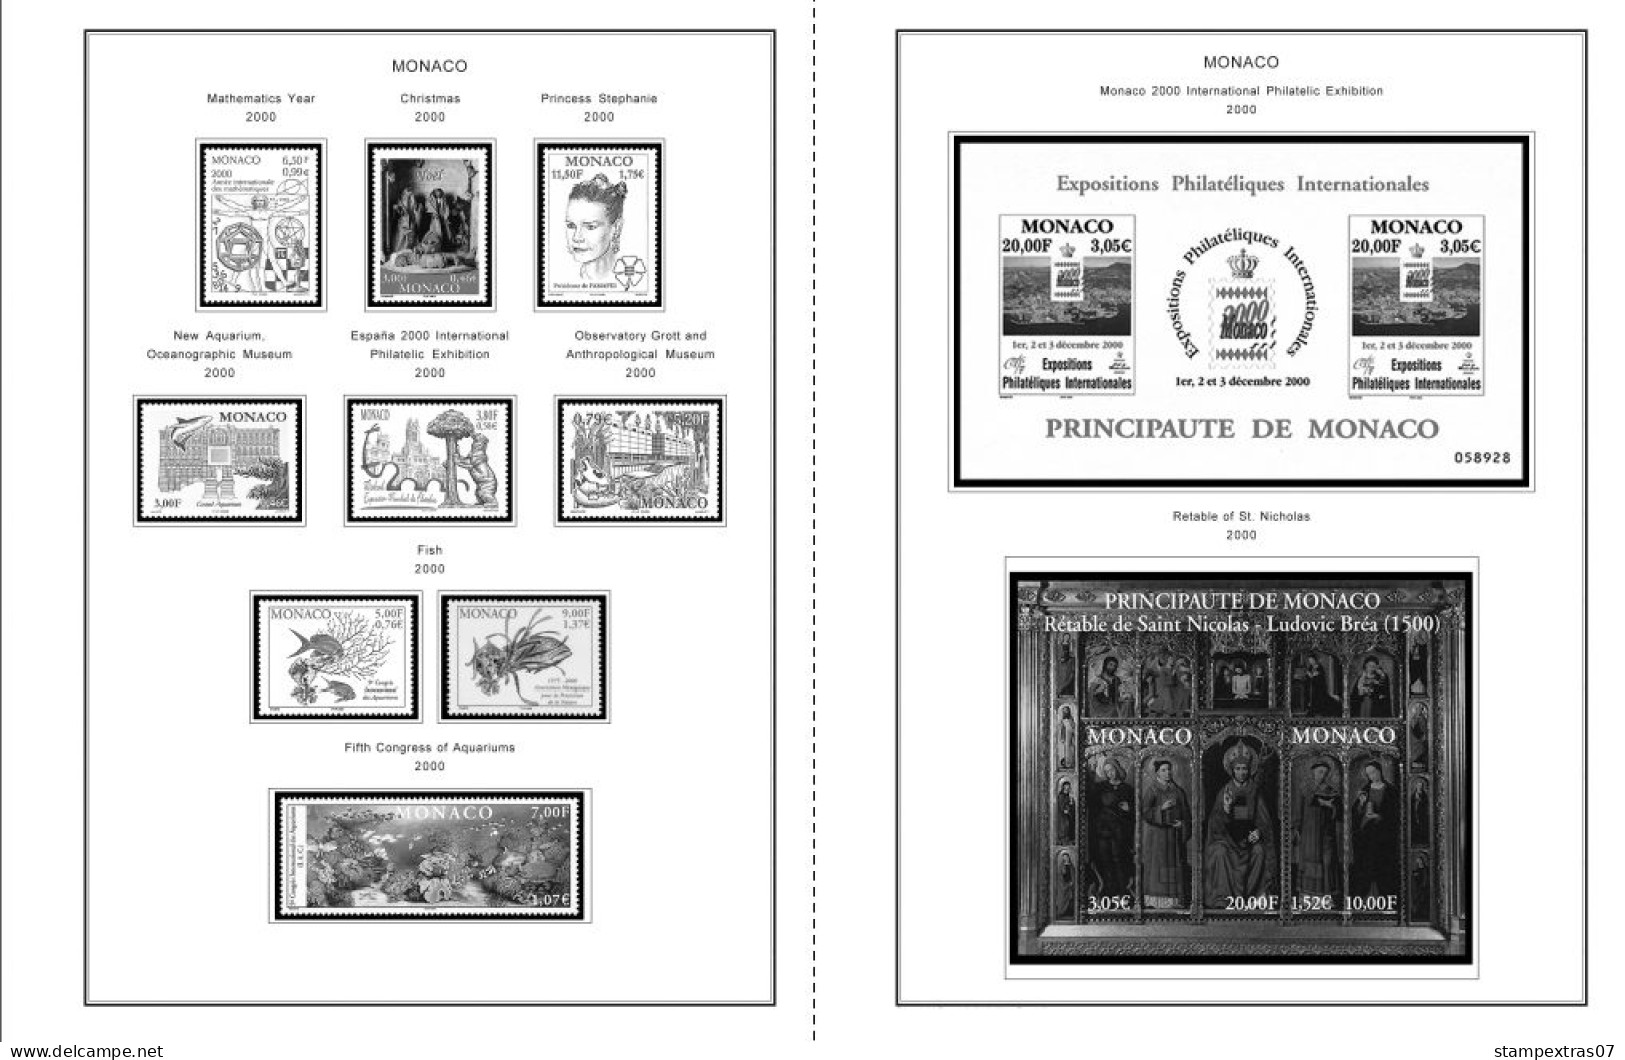 MONACO 1855-2010 + 2011-2020 STAMP ALBUM PAGES (409 B&w Illustrated Pages) - Engels